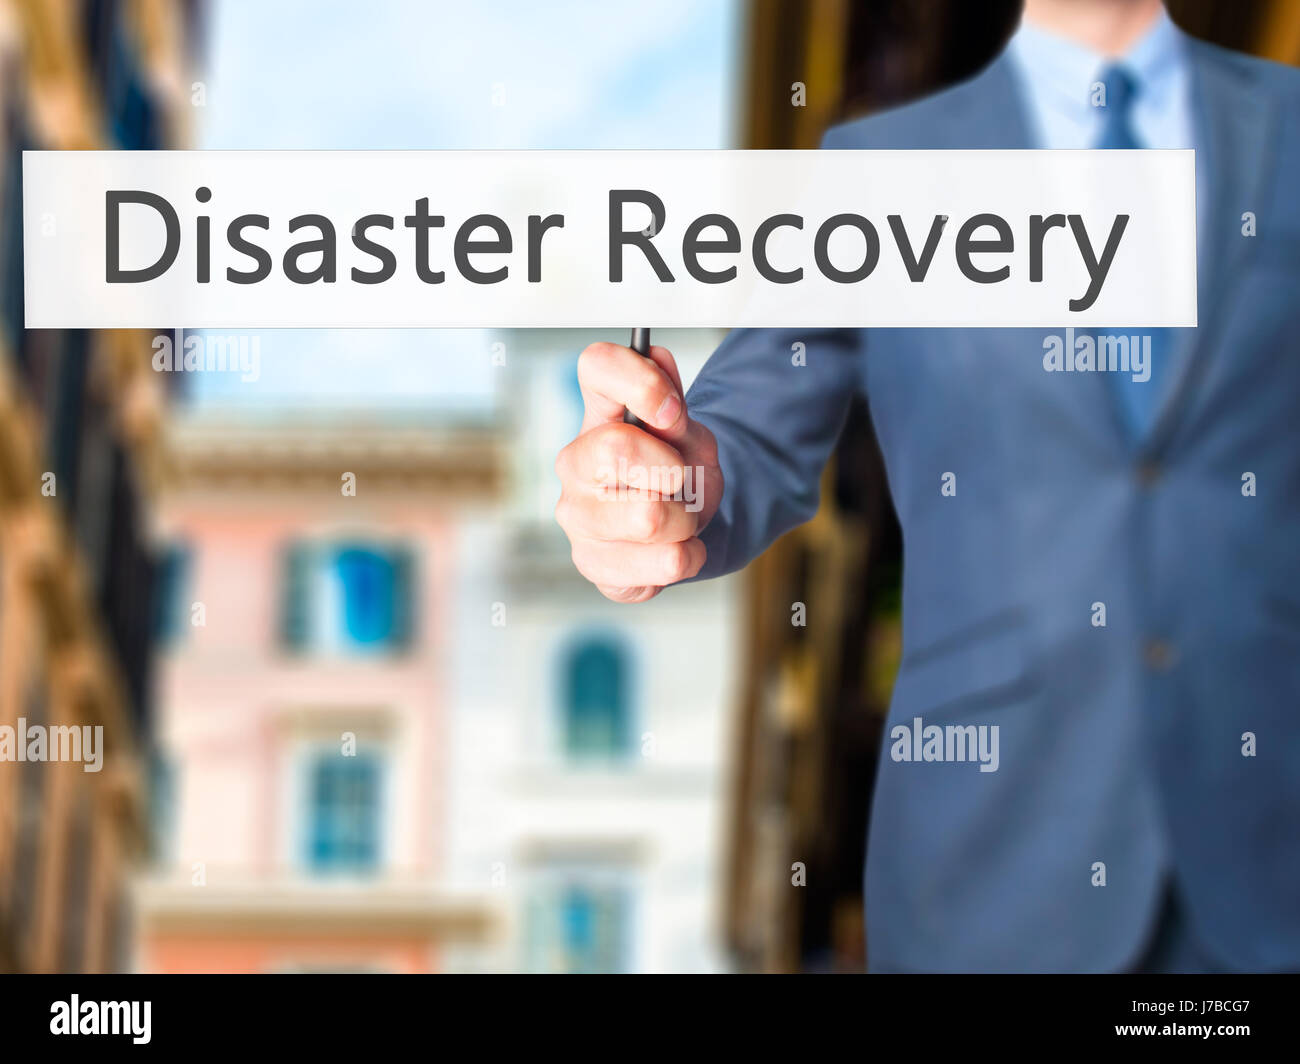 Disaster Recovery - Businessman hand holding sign. Business, technology, internet concept. Stock Photo Stock Photo